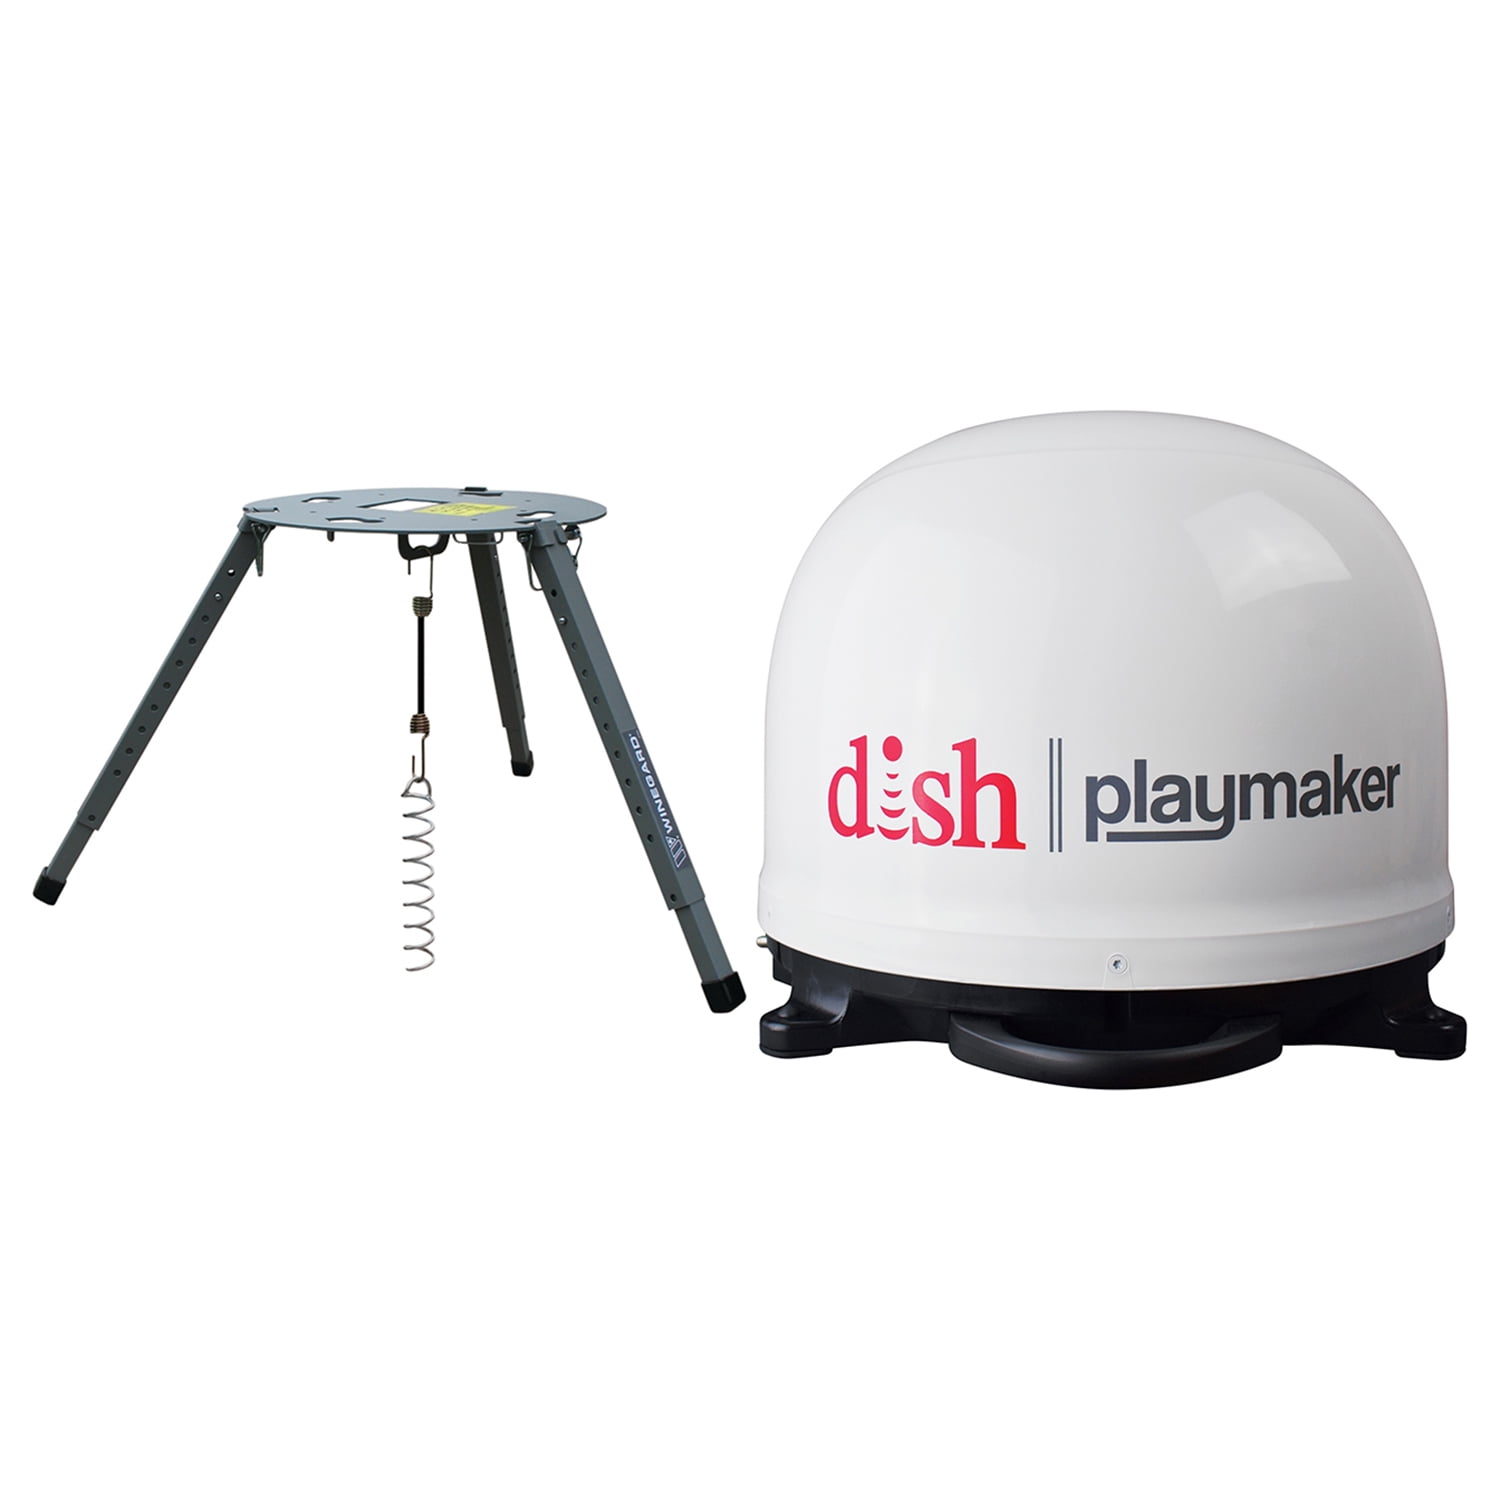 Carryout Automatic & Playmaker Dish Mount Tripod Antenna TR-1518 Portable Satellite Winegard TV PL-7000